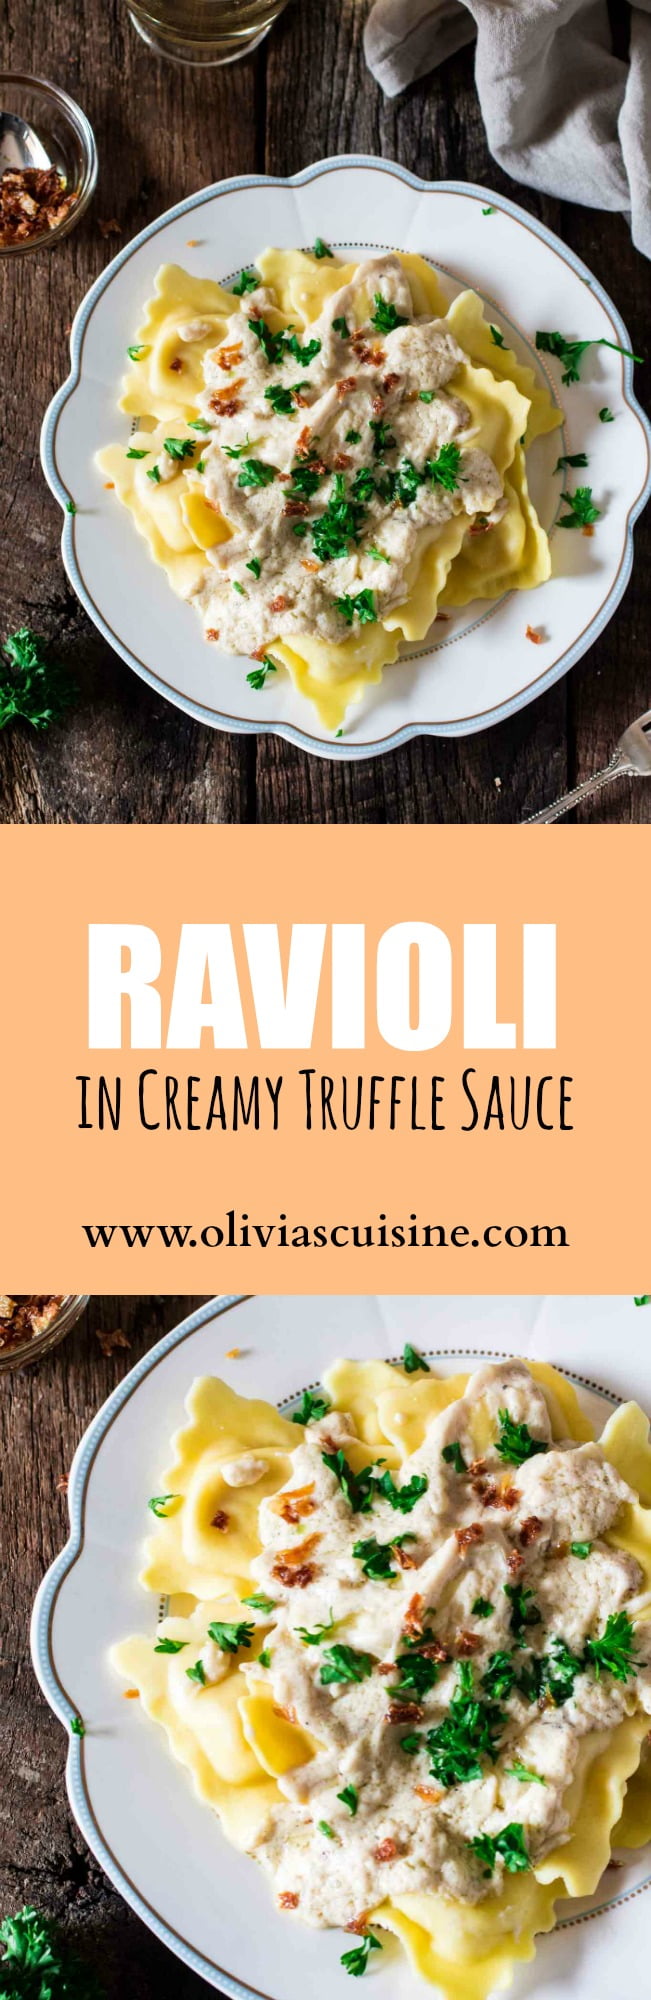 Ravioli in Creamy Truffle Sauce | www.oliviascuisine.com | A quick and easy recipe that is dairy free and can also be made vegan!